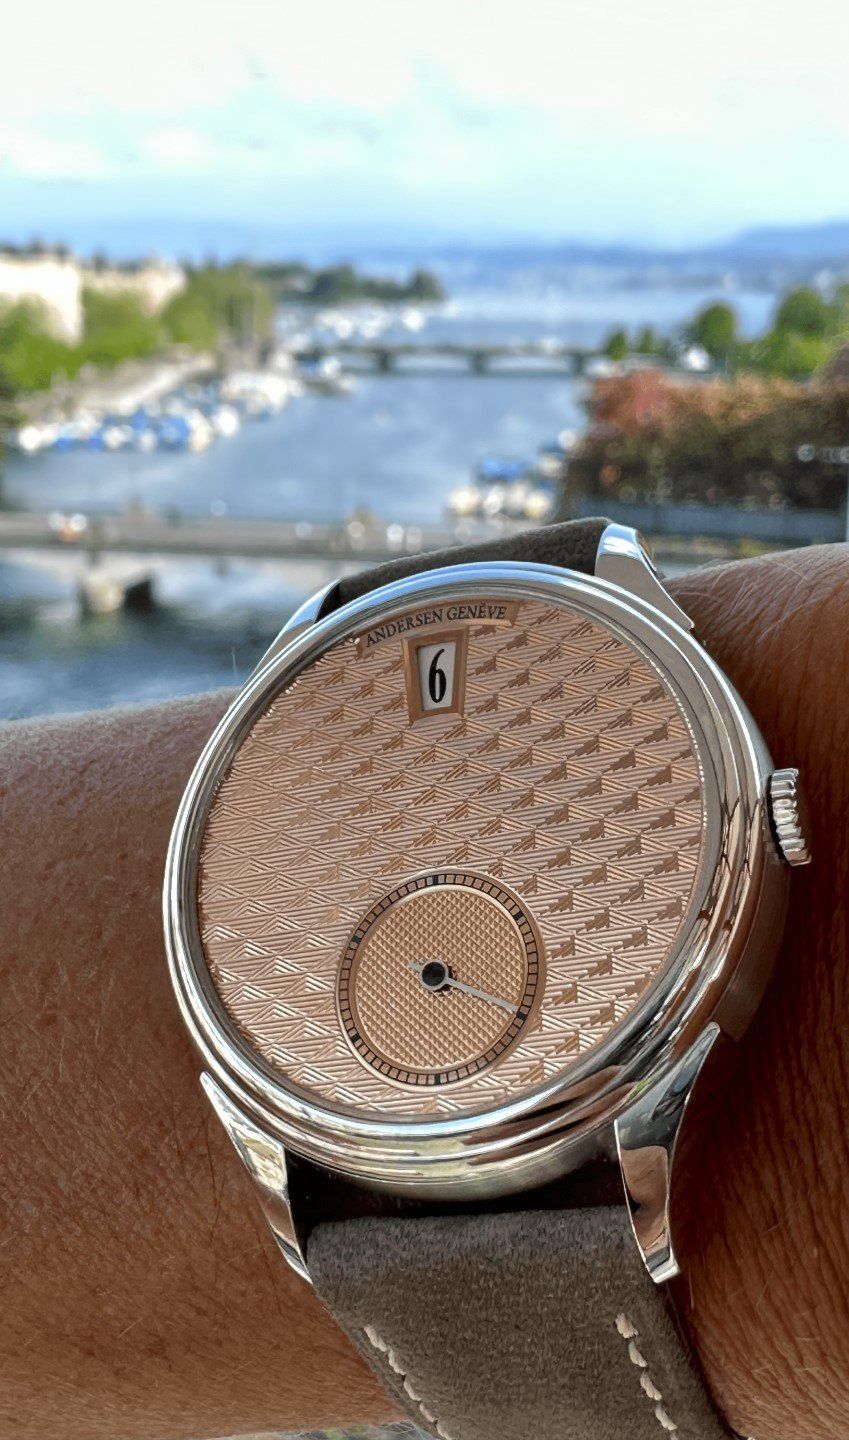 Andersen Genève launches the Jumping Hours watch in Pink Gold and Platinum